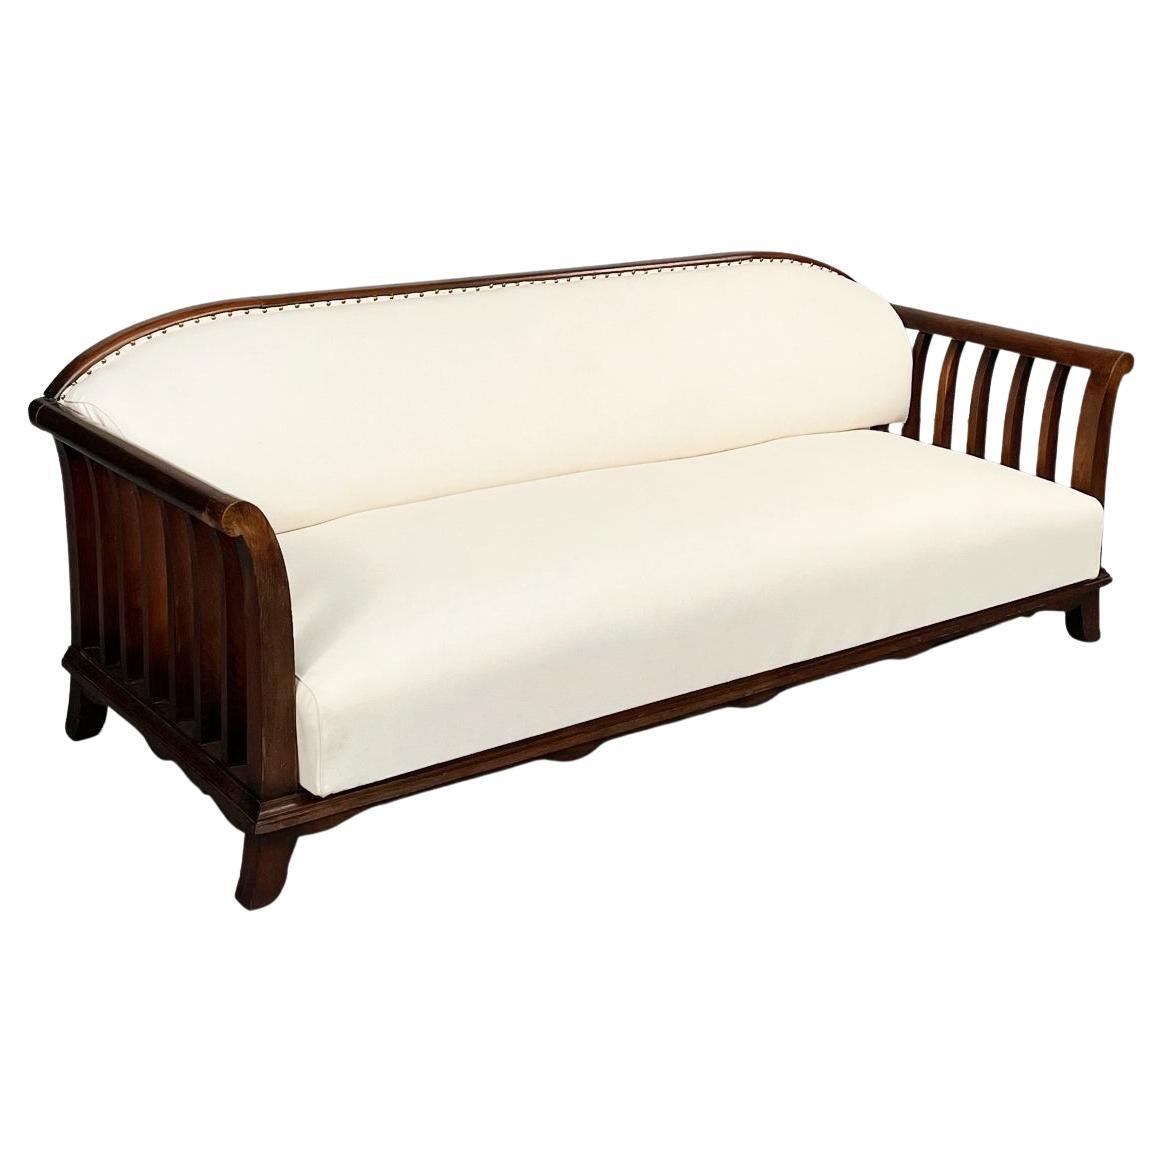 Italian Modern Wooden Sofa with White Fabric, 1940s For Sale